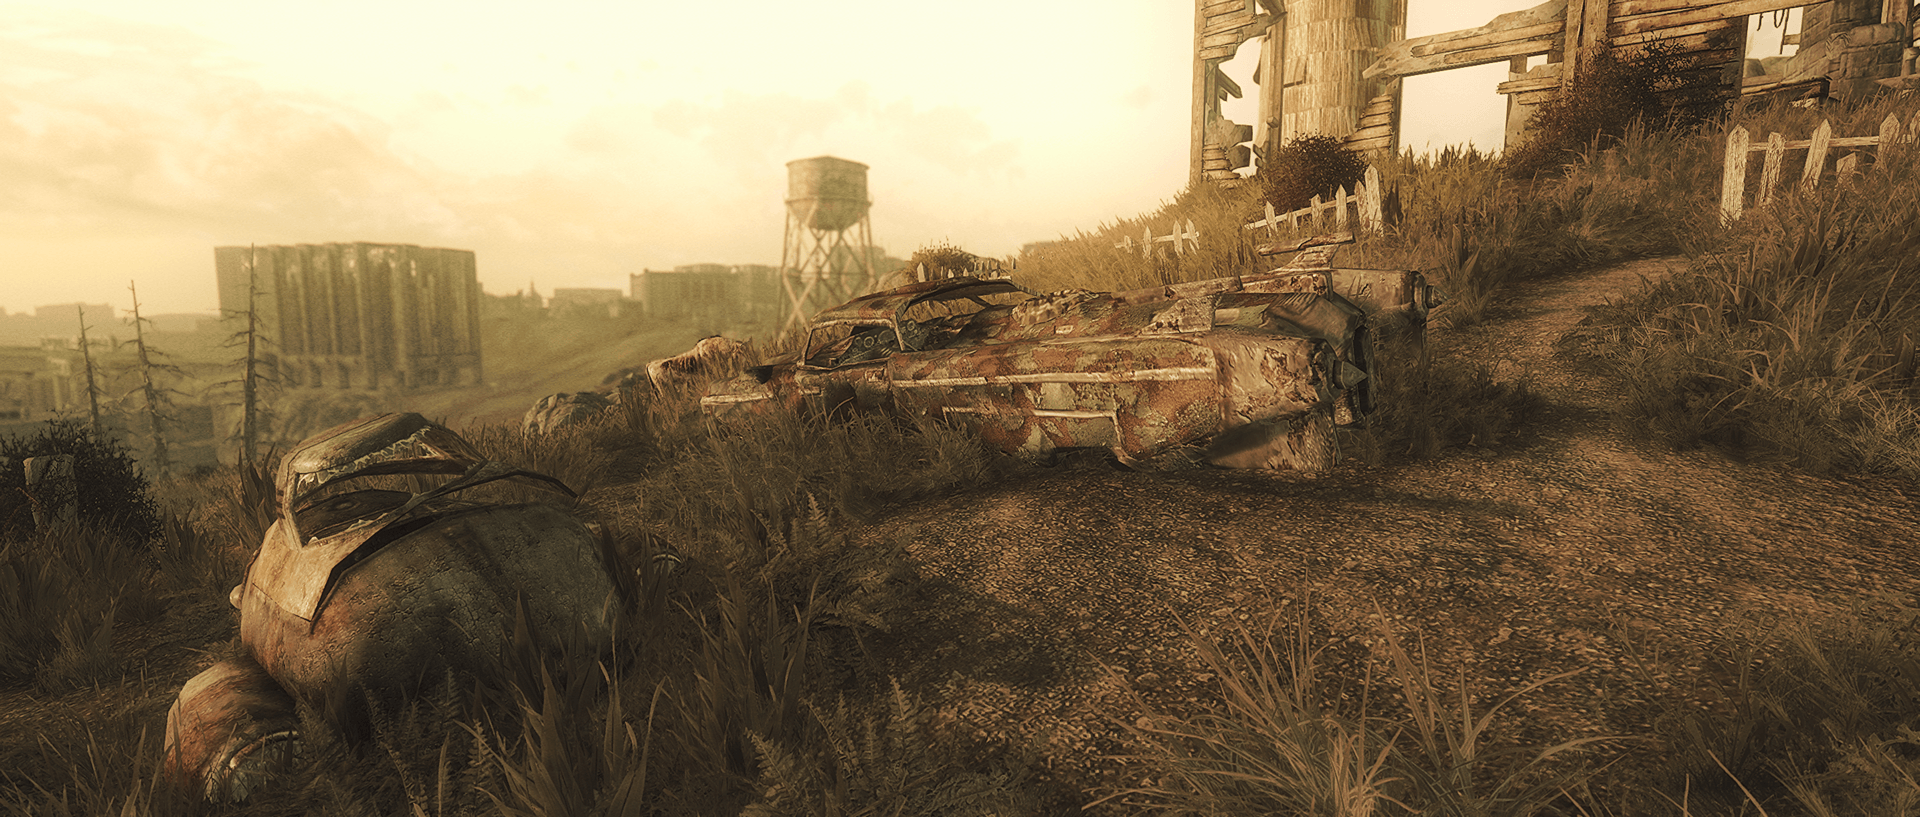 Wasteland Wallpaper, HD Creative Wasteland Picture, Full HD